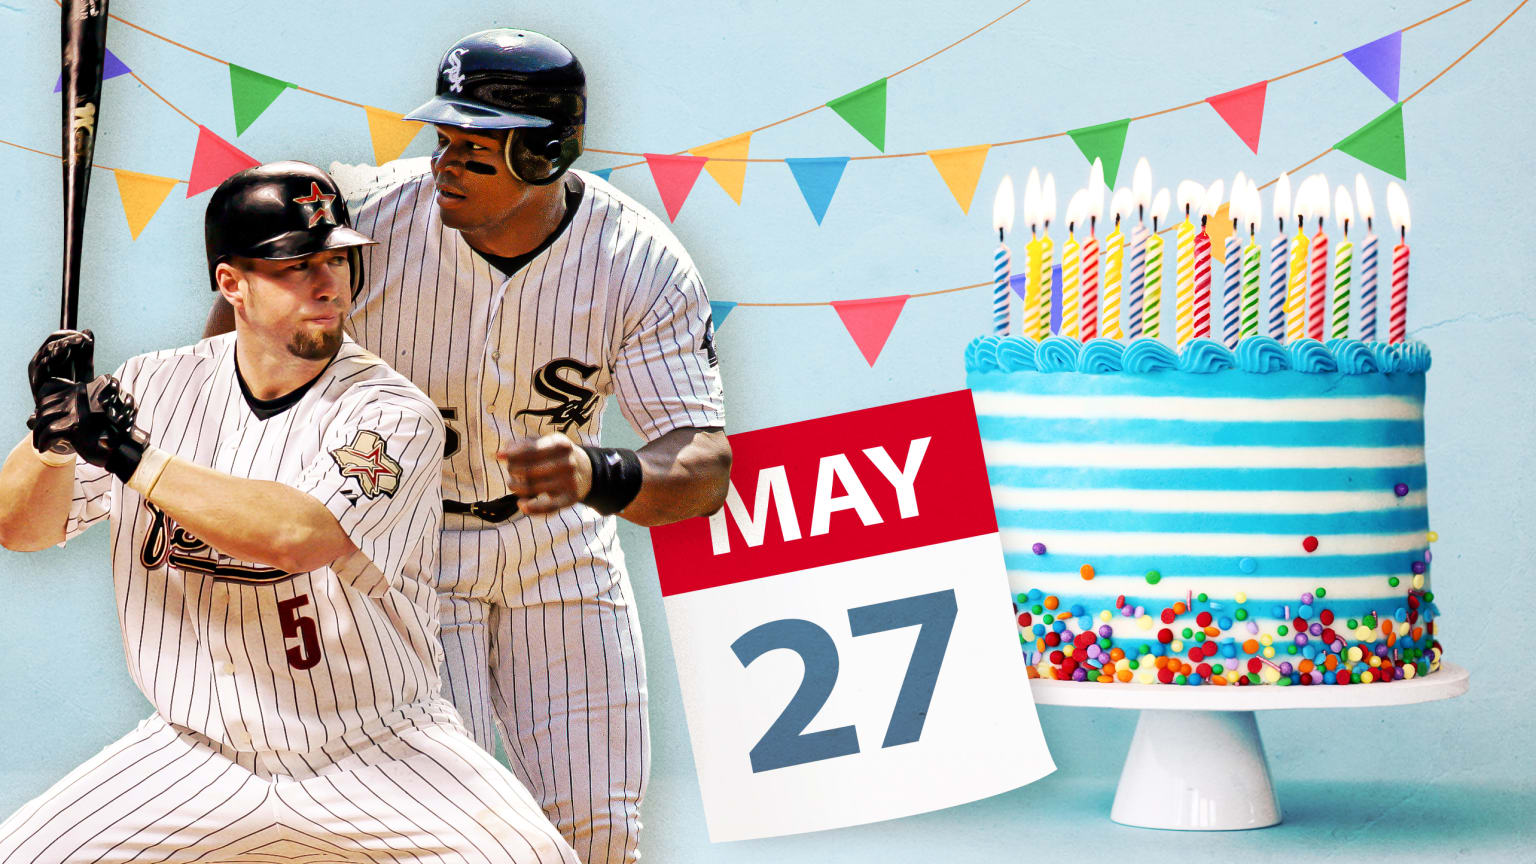 A photo illustration of a birthday cake and a May 27 calendar page with images of Jeff Bagwell and Frank Thomas